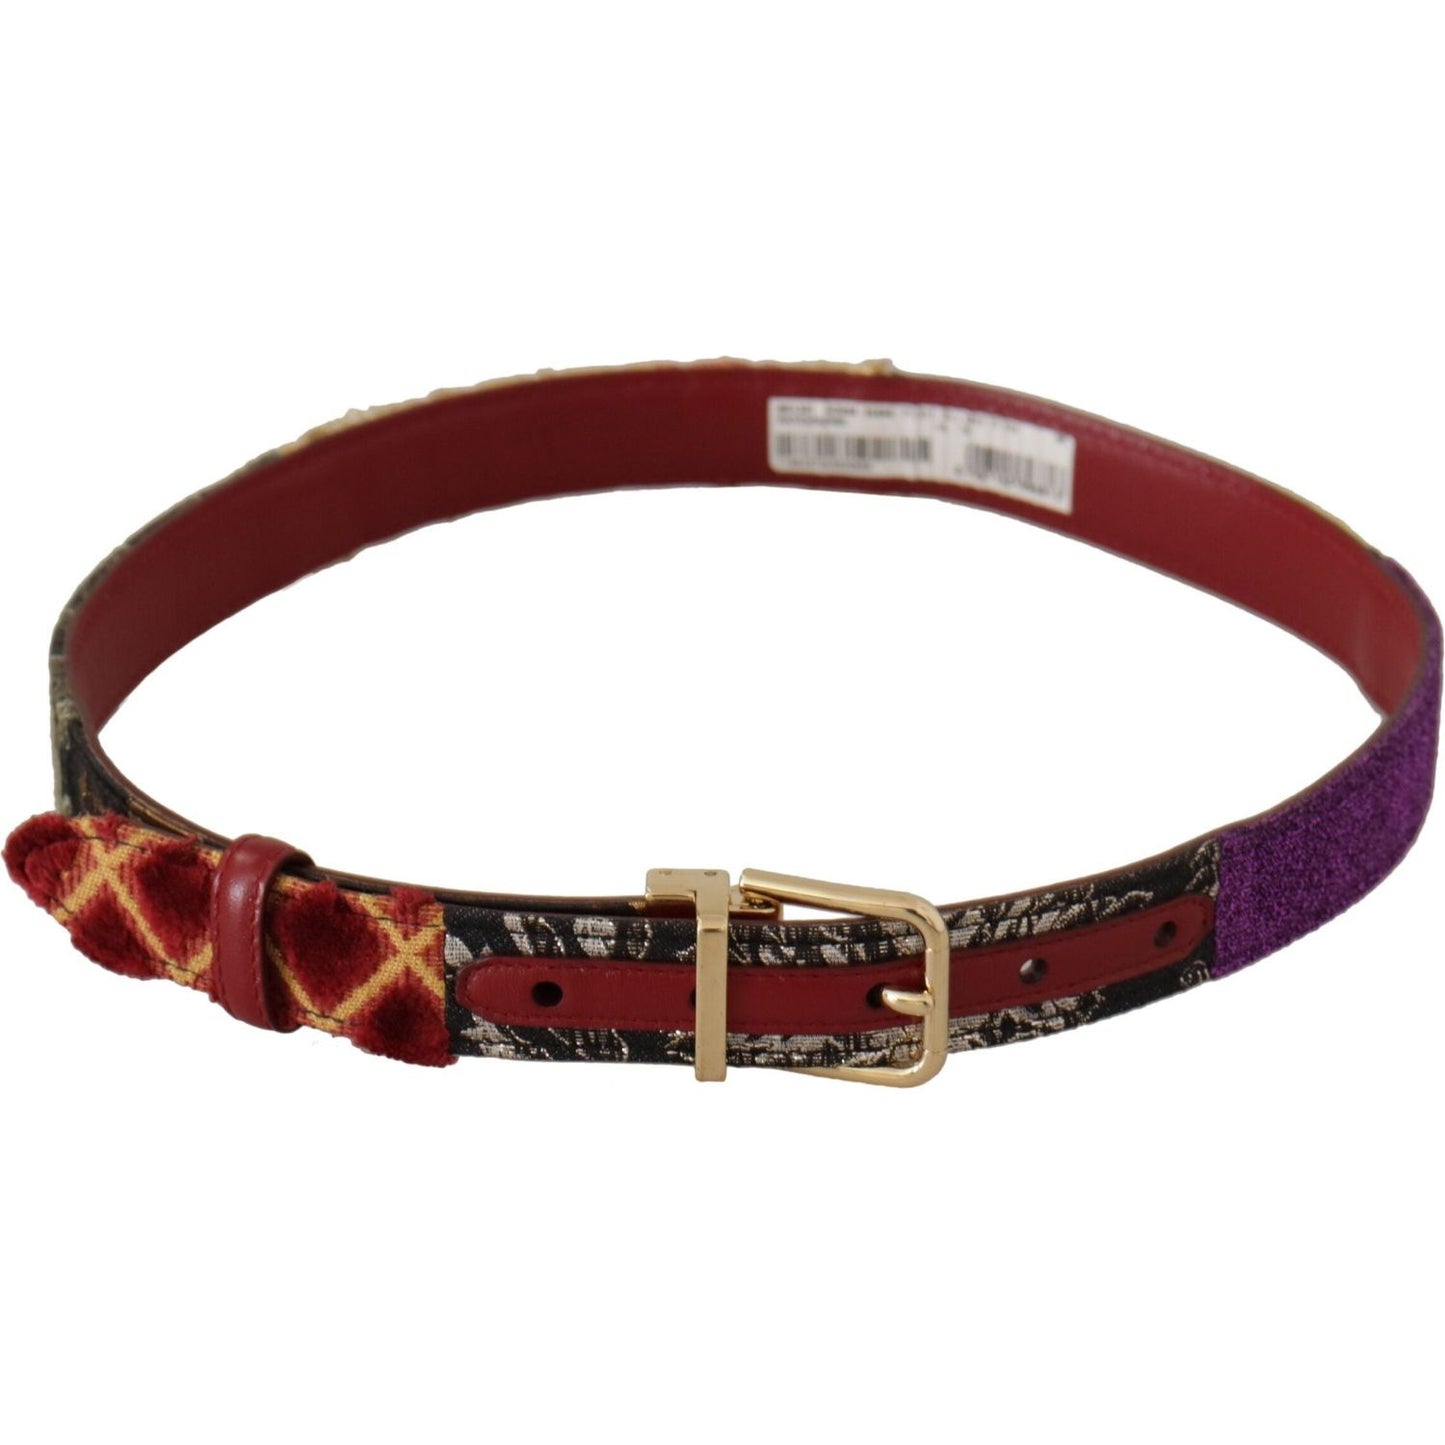 Dolce & Gabbana Multicolor Canvas Leather Belt with Engraved Buckle multicolor-patchwork-leather-gold-metal-buckle-belt